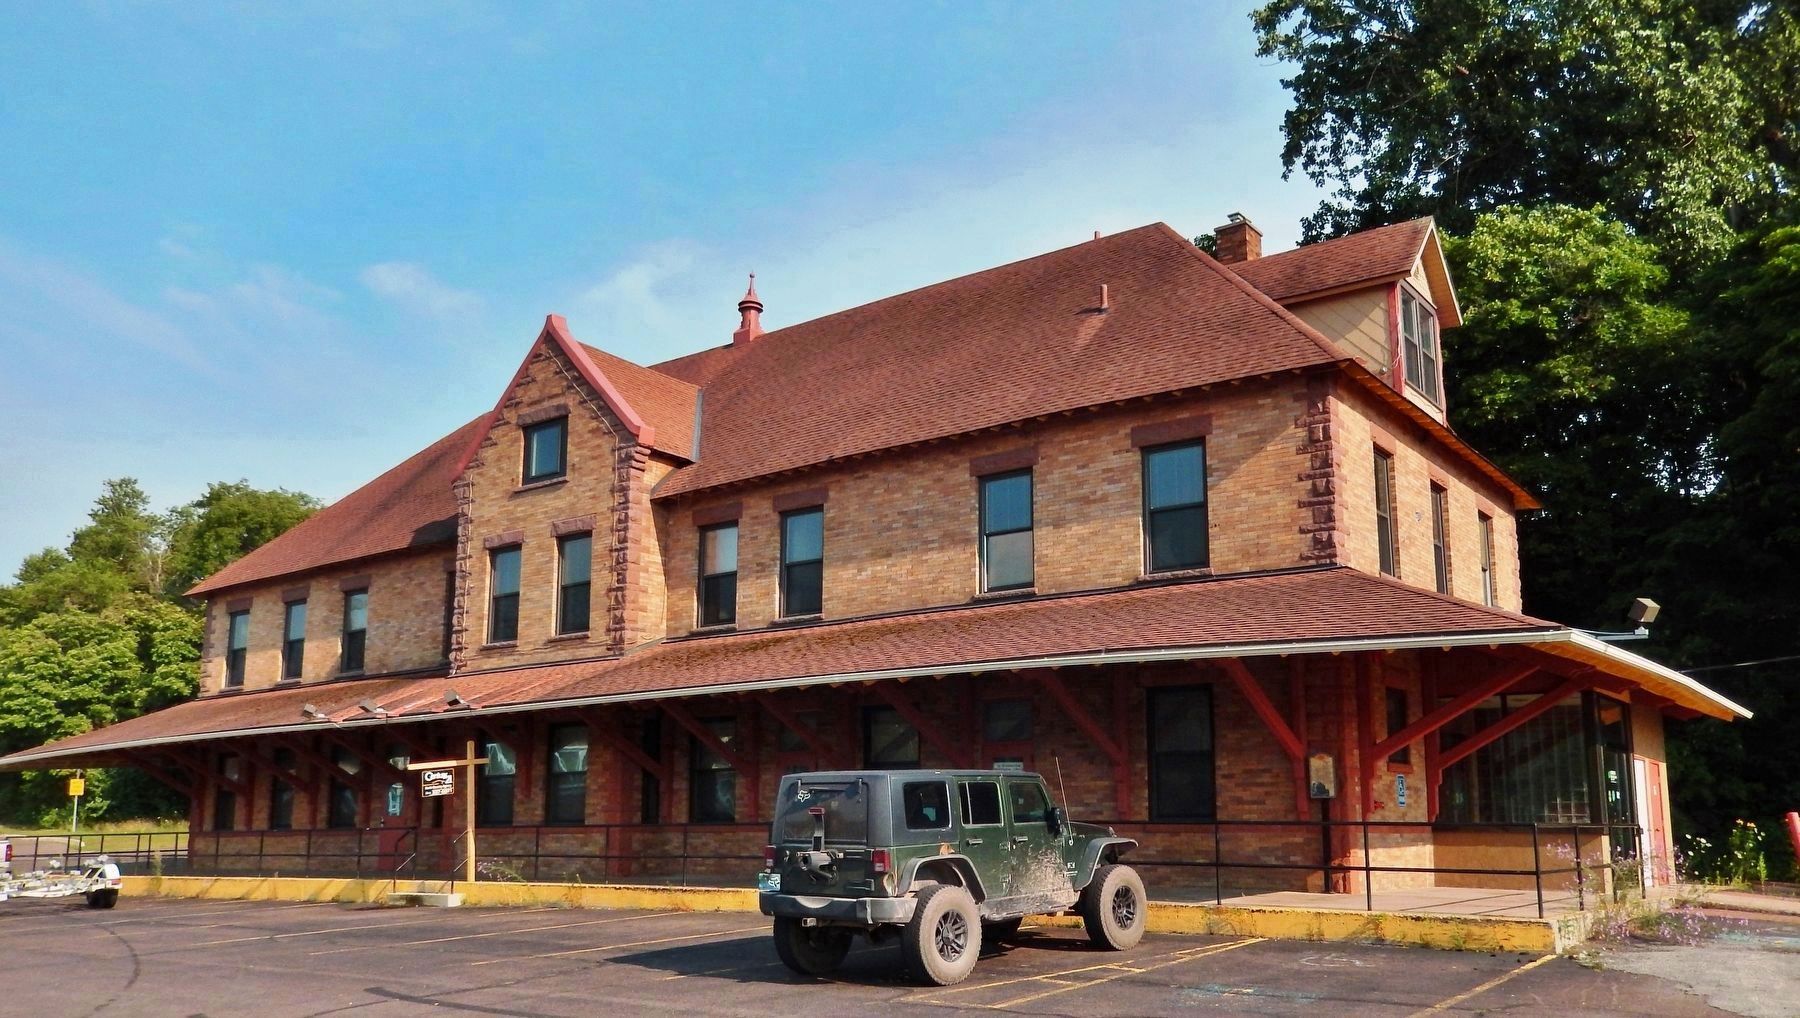 1899 Copper Range Railroad Depot & Administrative Offices image. Click for full size.